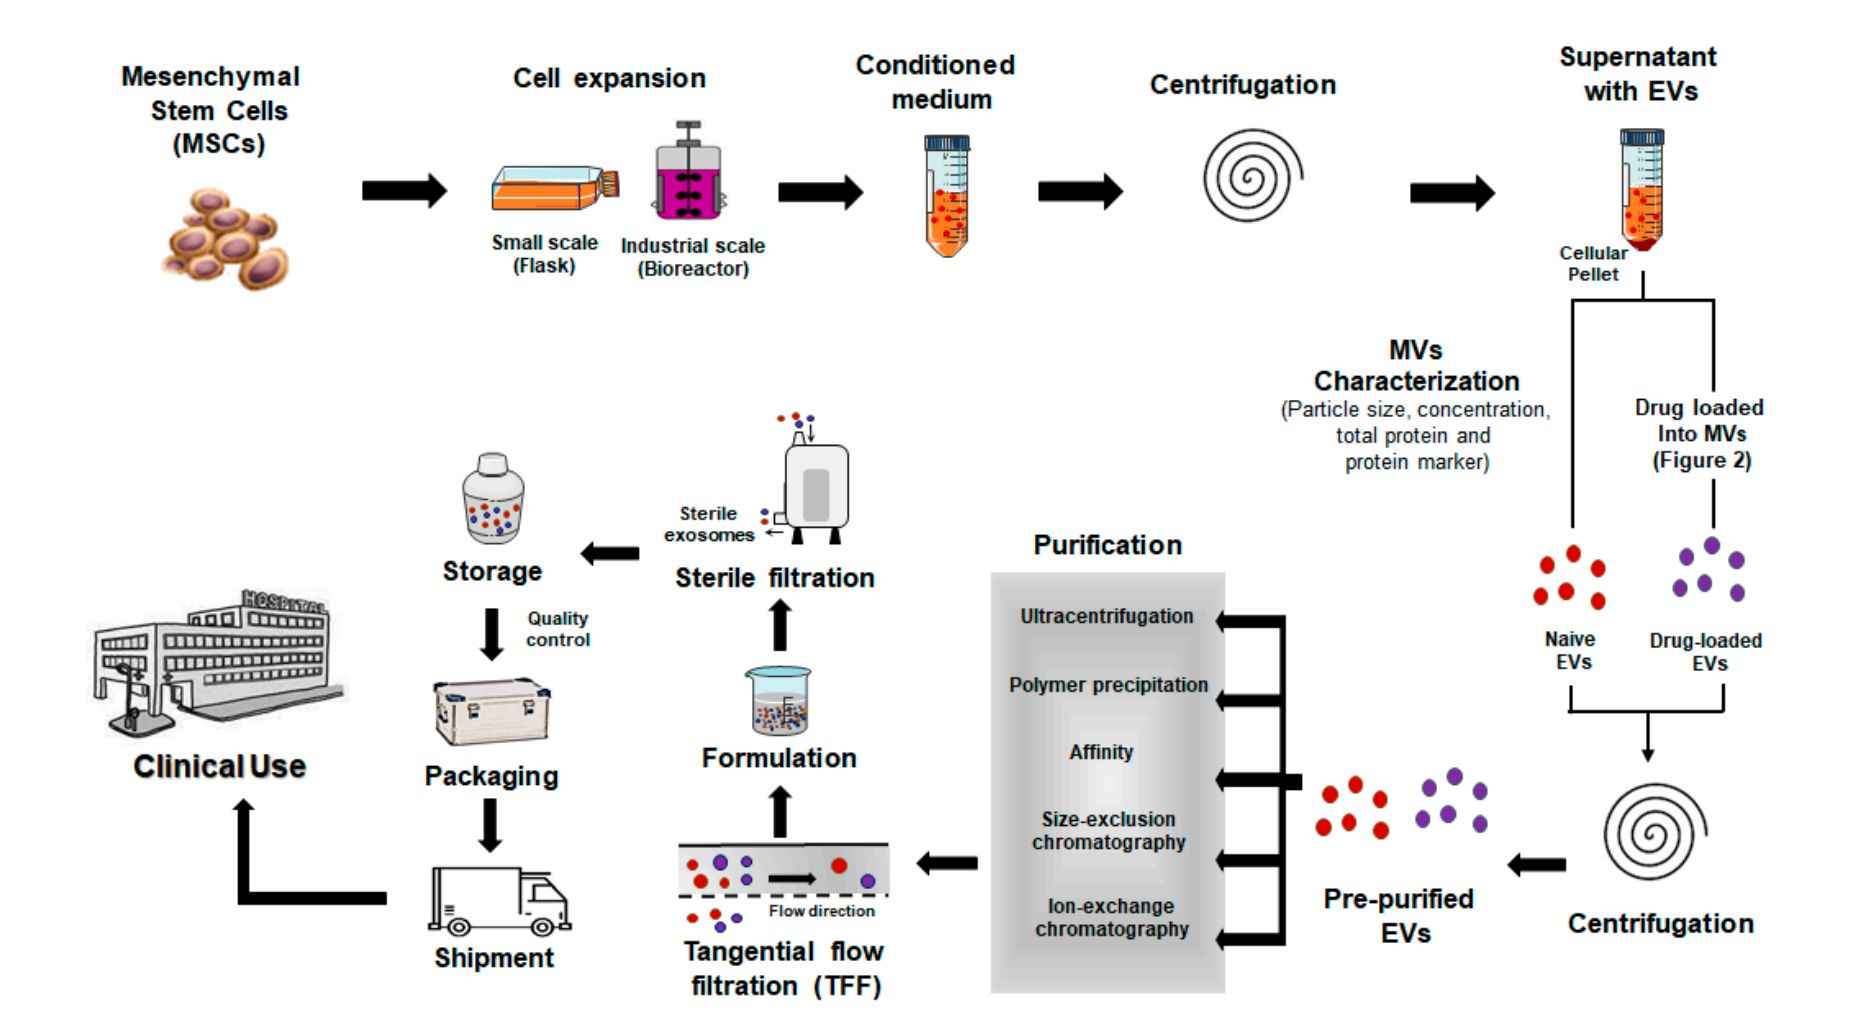 Figure 1. Schematic diagram of a clinical manufacturing method for producing exosome therapy.